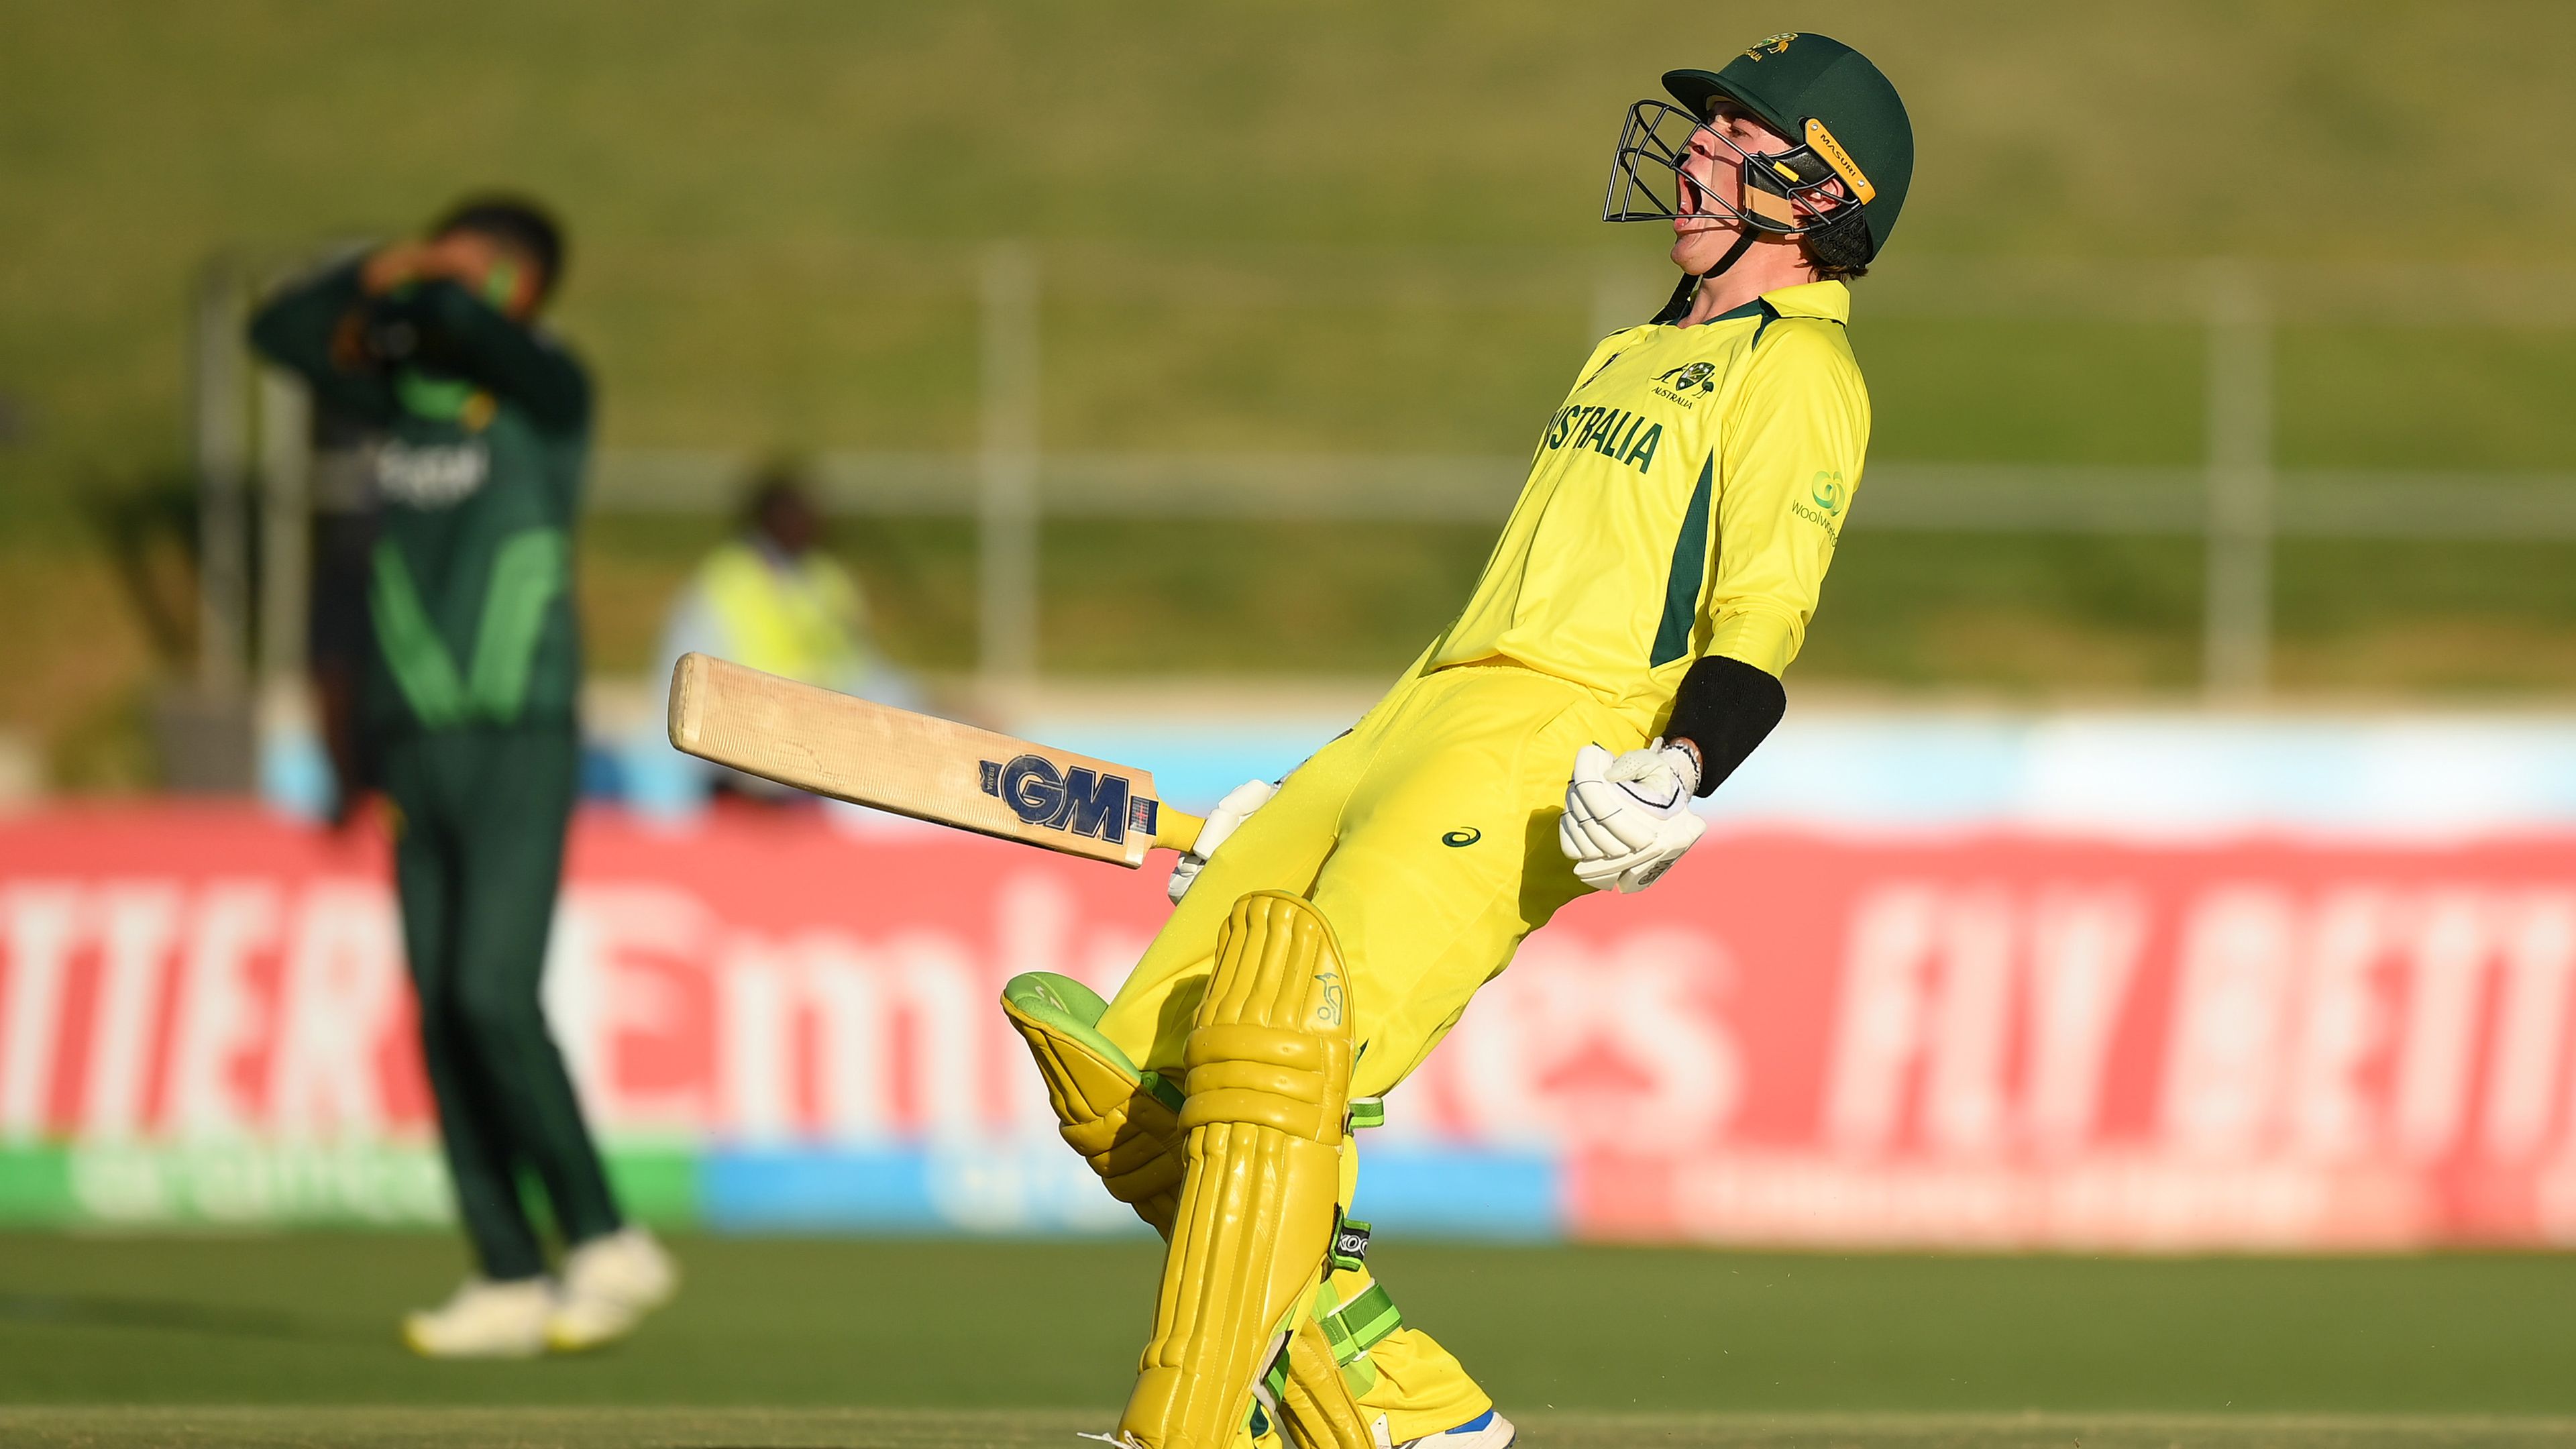 Aussies win through to under 19 World Cup final with thrilling one-wicket victory